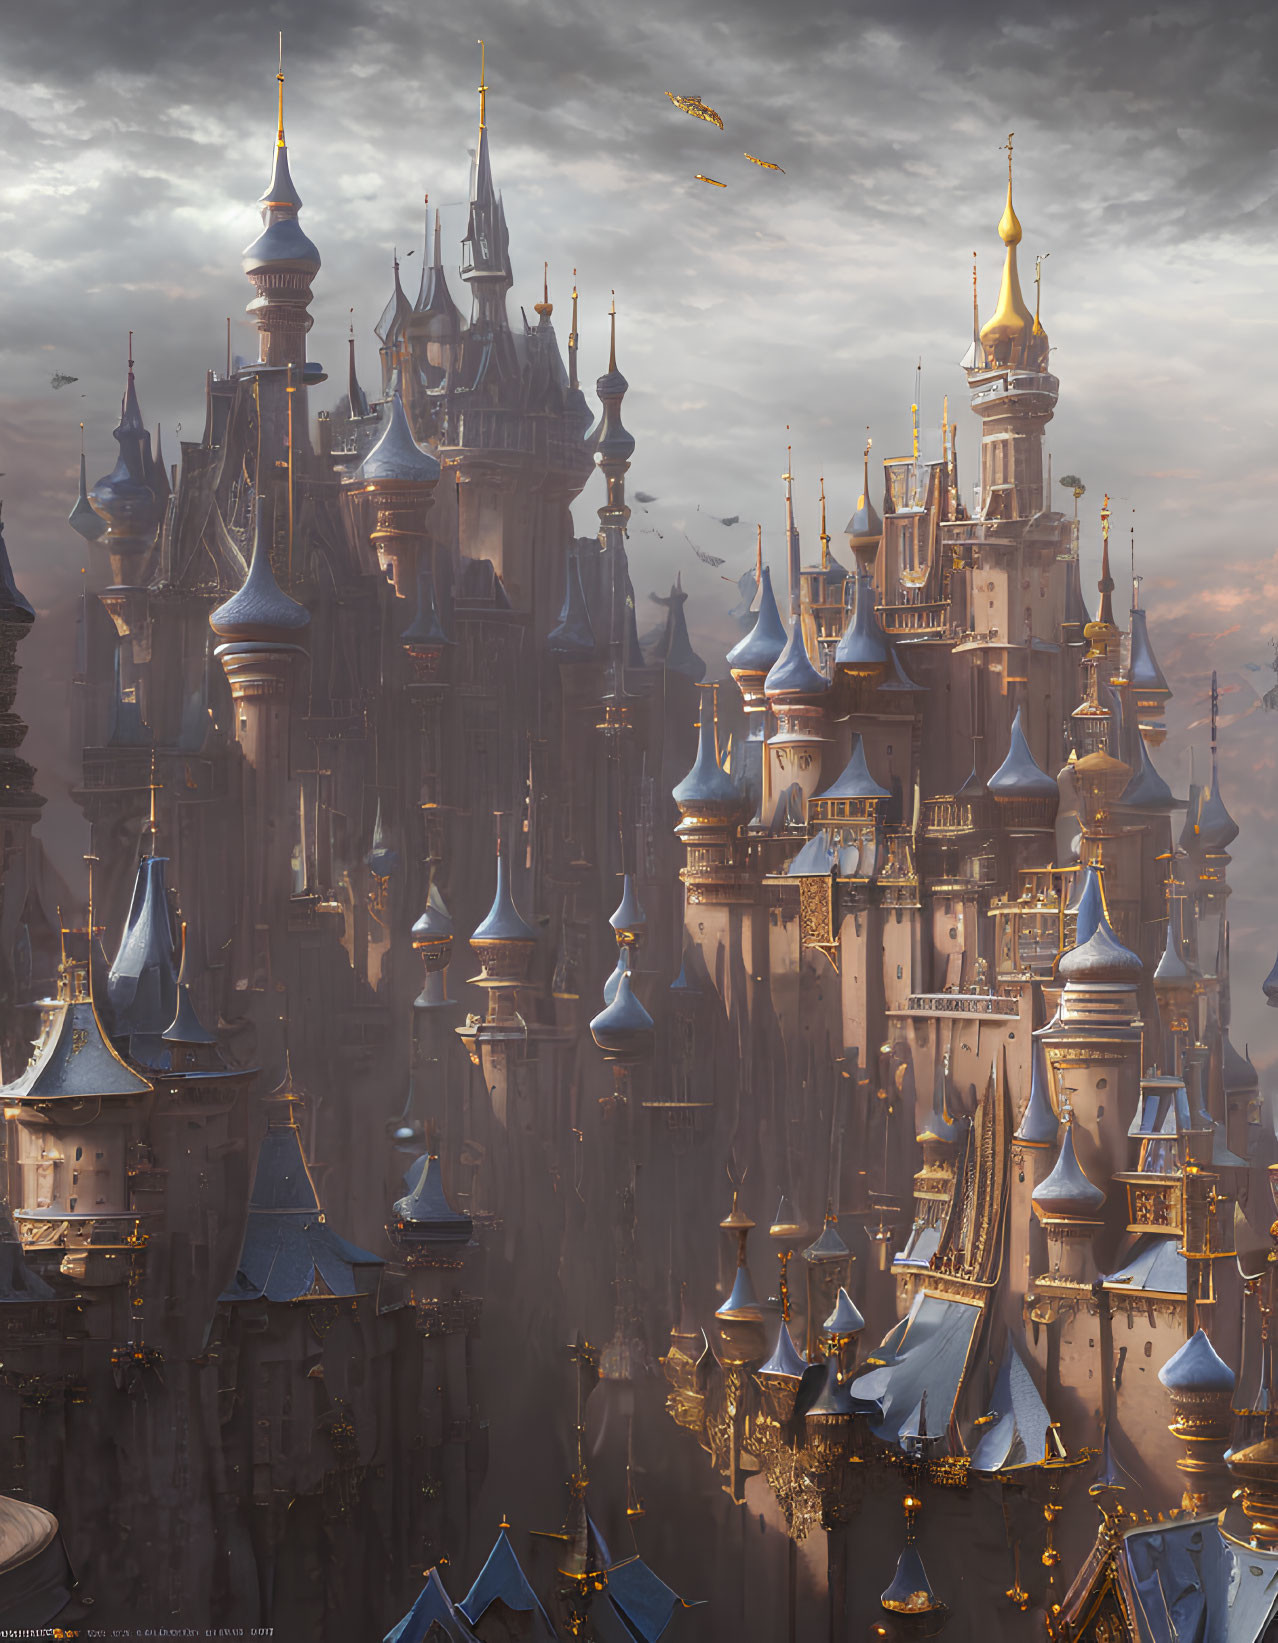 Fantasy castle with golden rooftops and airships in cloudy sky